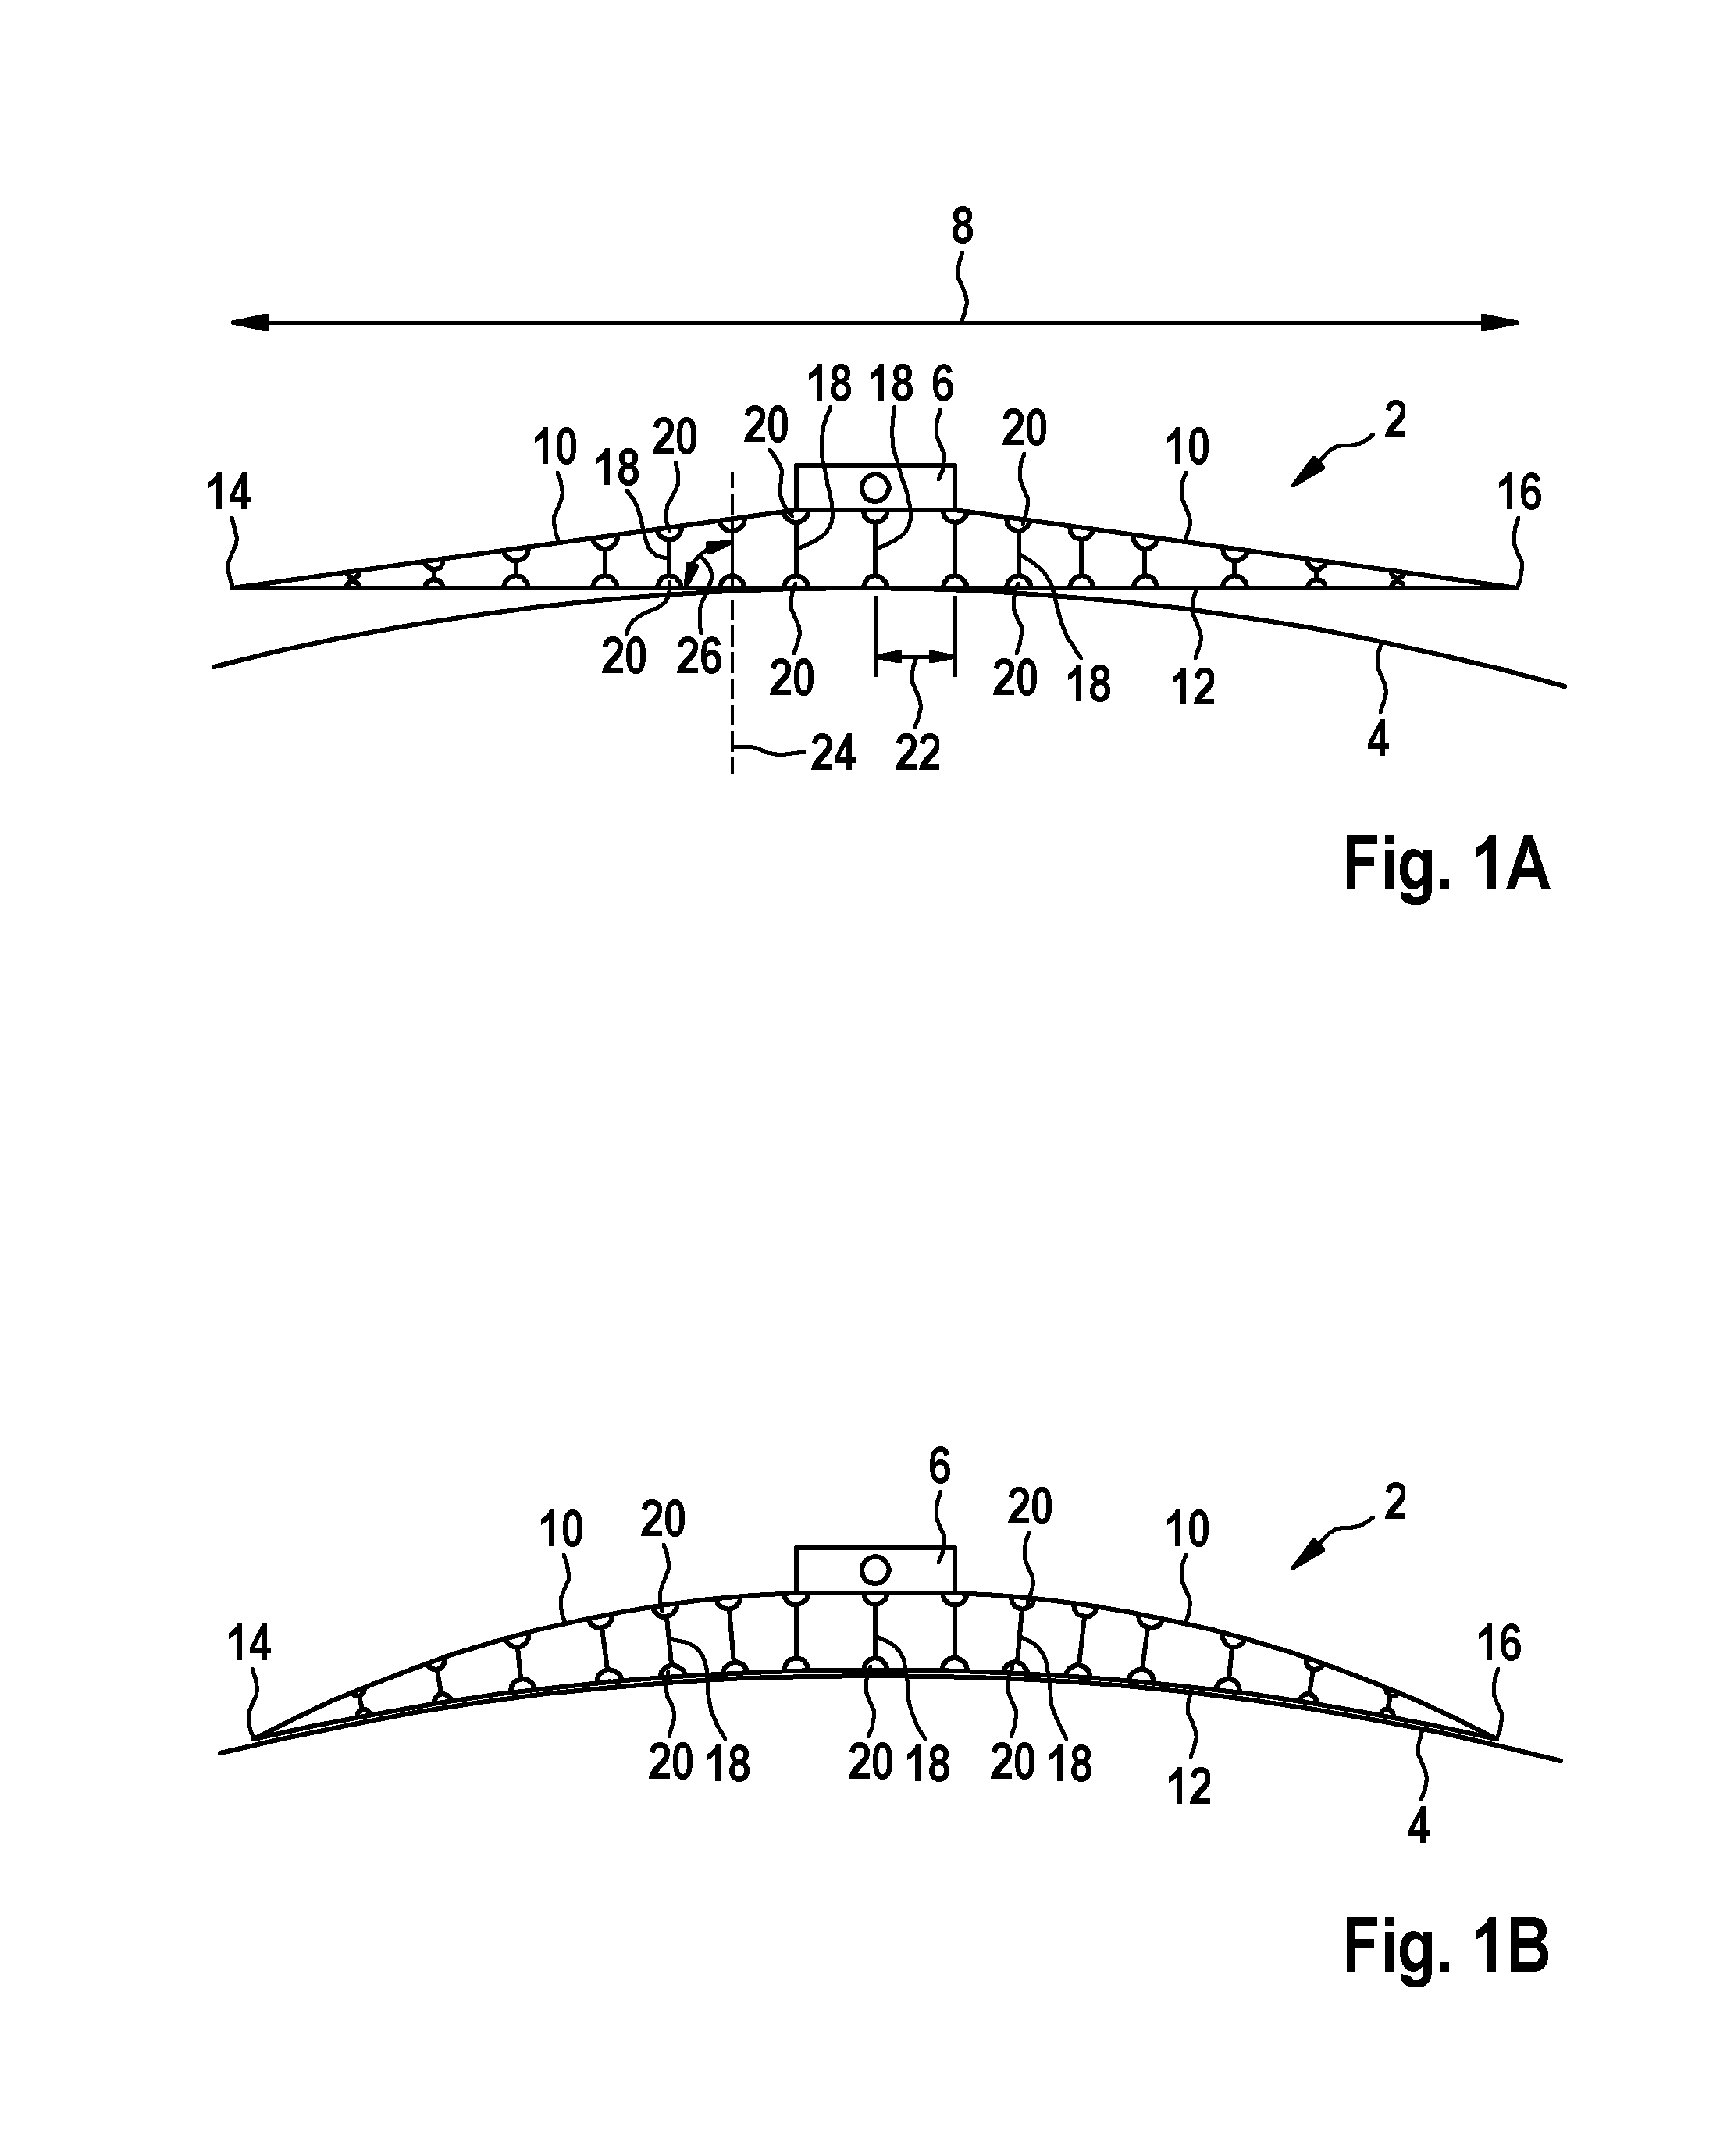 Windscreen wiper device for a vehicle